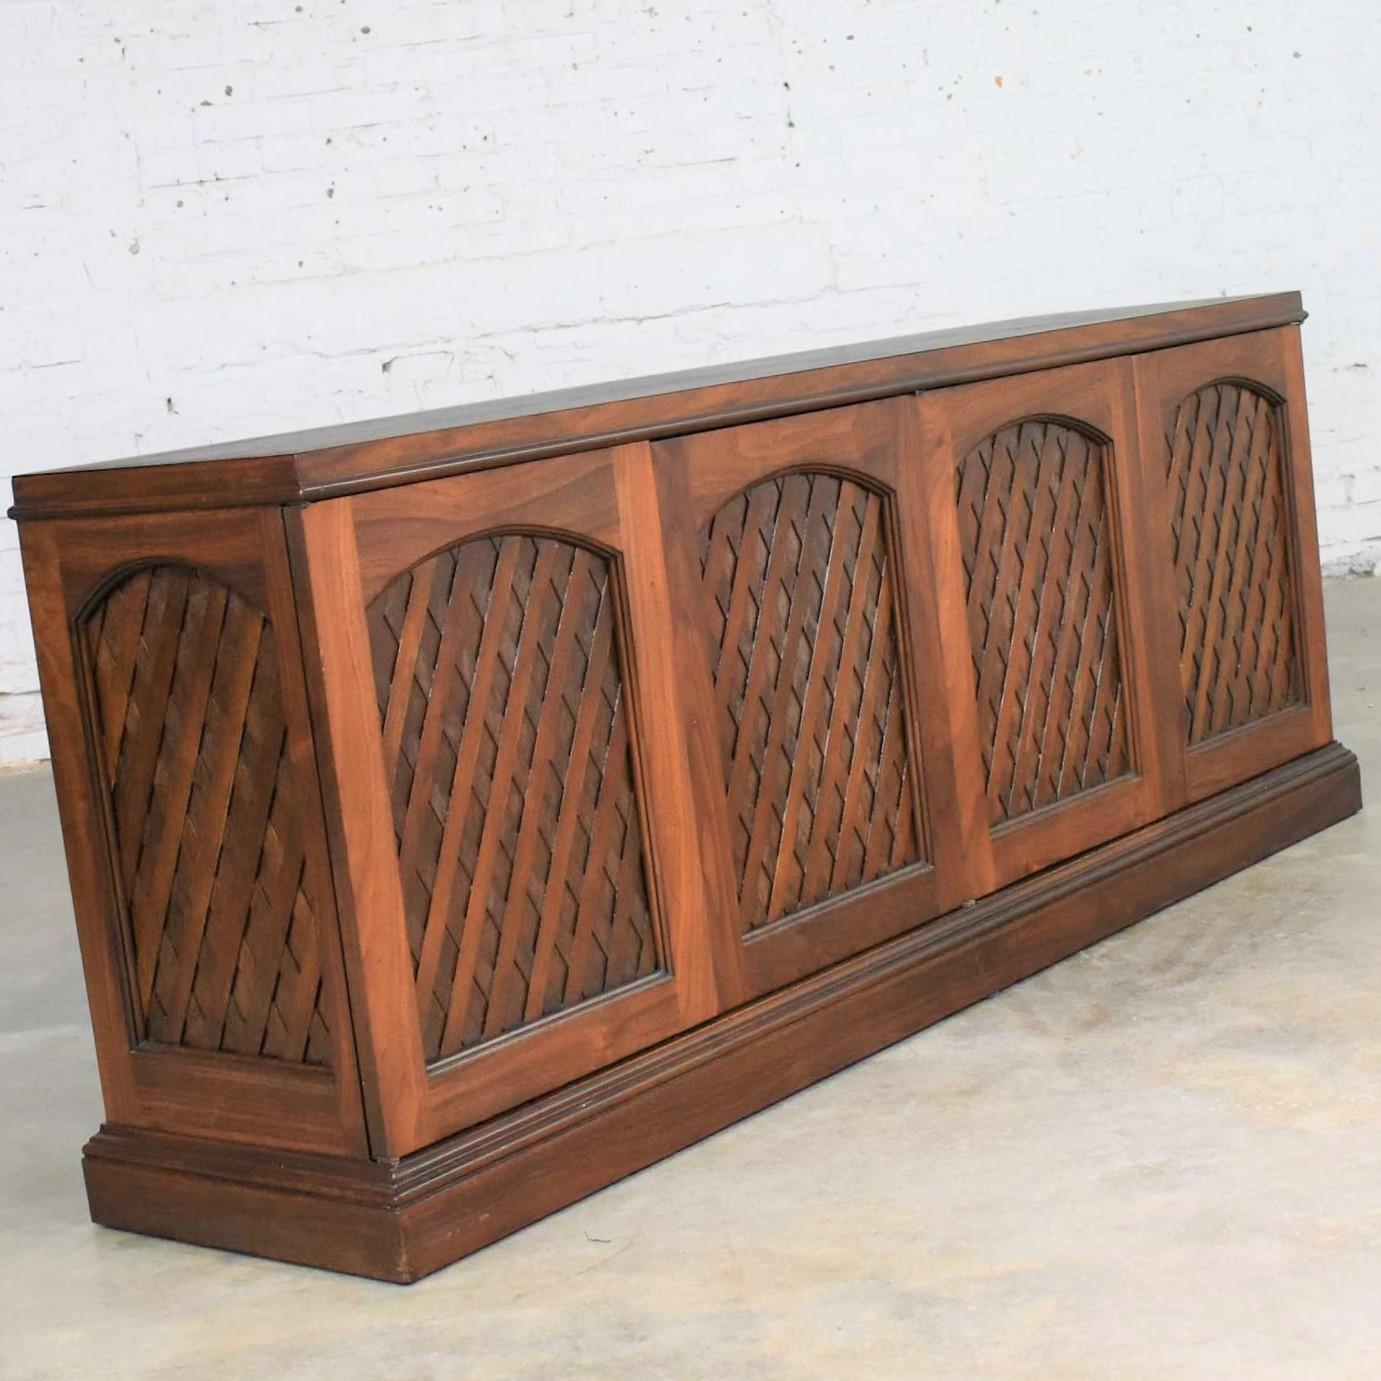 Handsome midcentury walnut shallow depth credenza with a diamond lattice pattern panel design. It is in wonderful condition. We have done a partial restoration to some of its finish but left some of the natural age distressing on the lattice panels